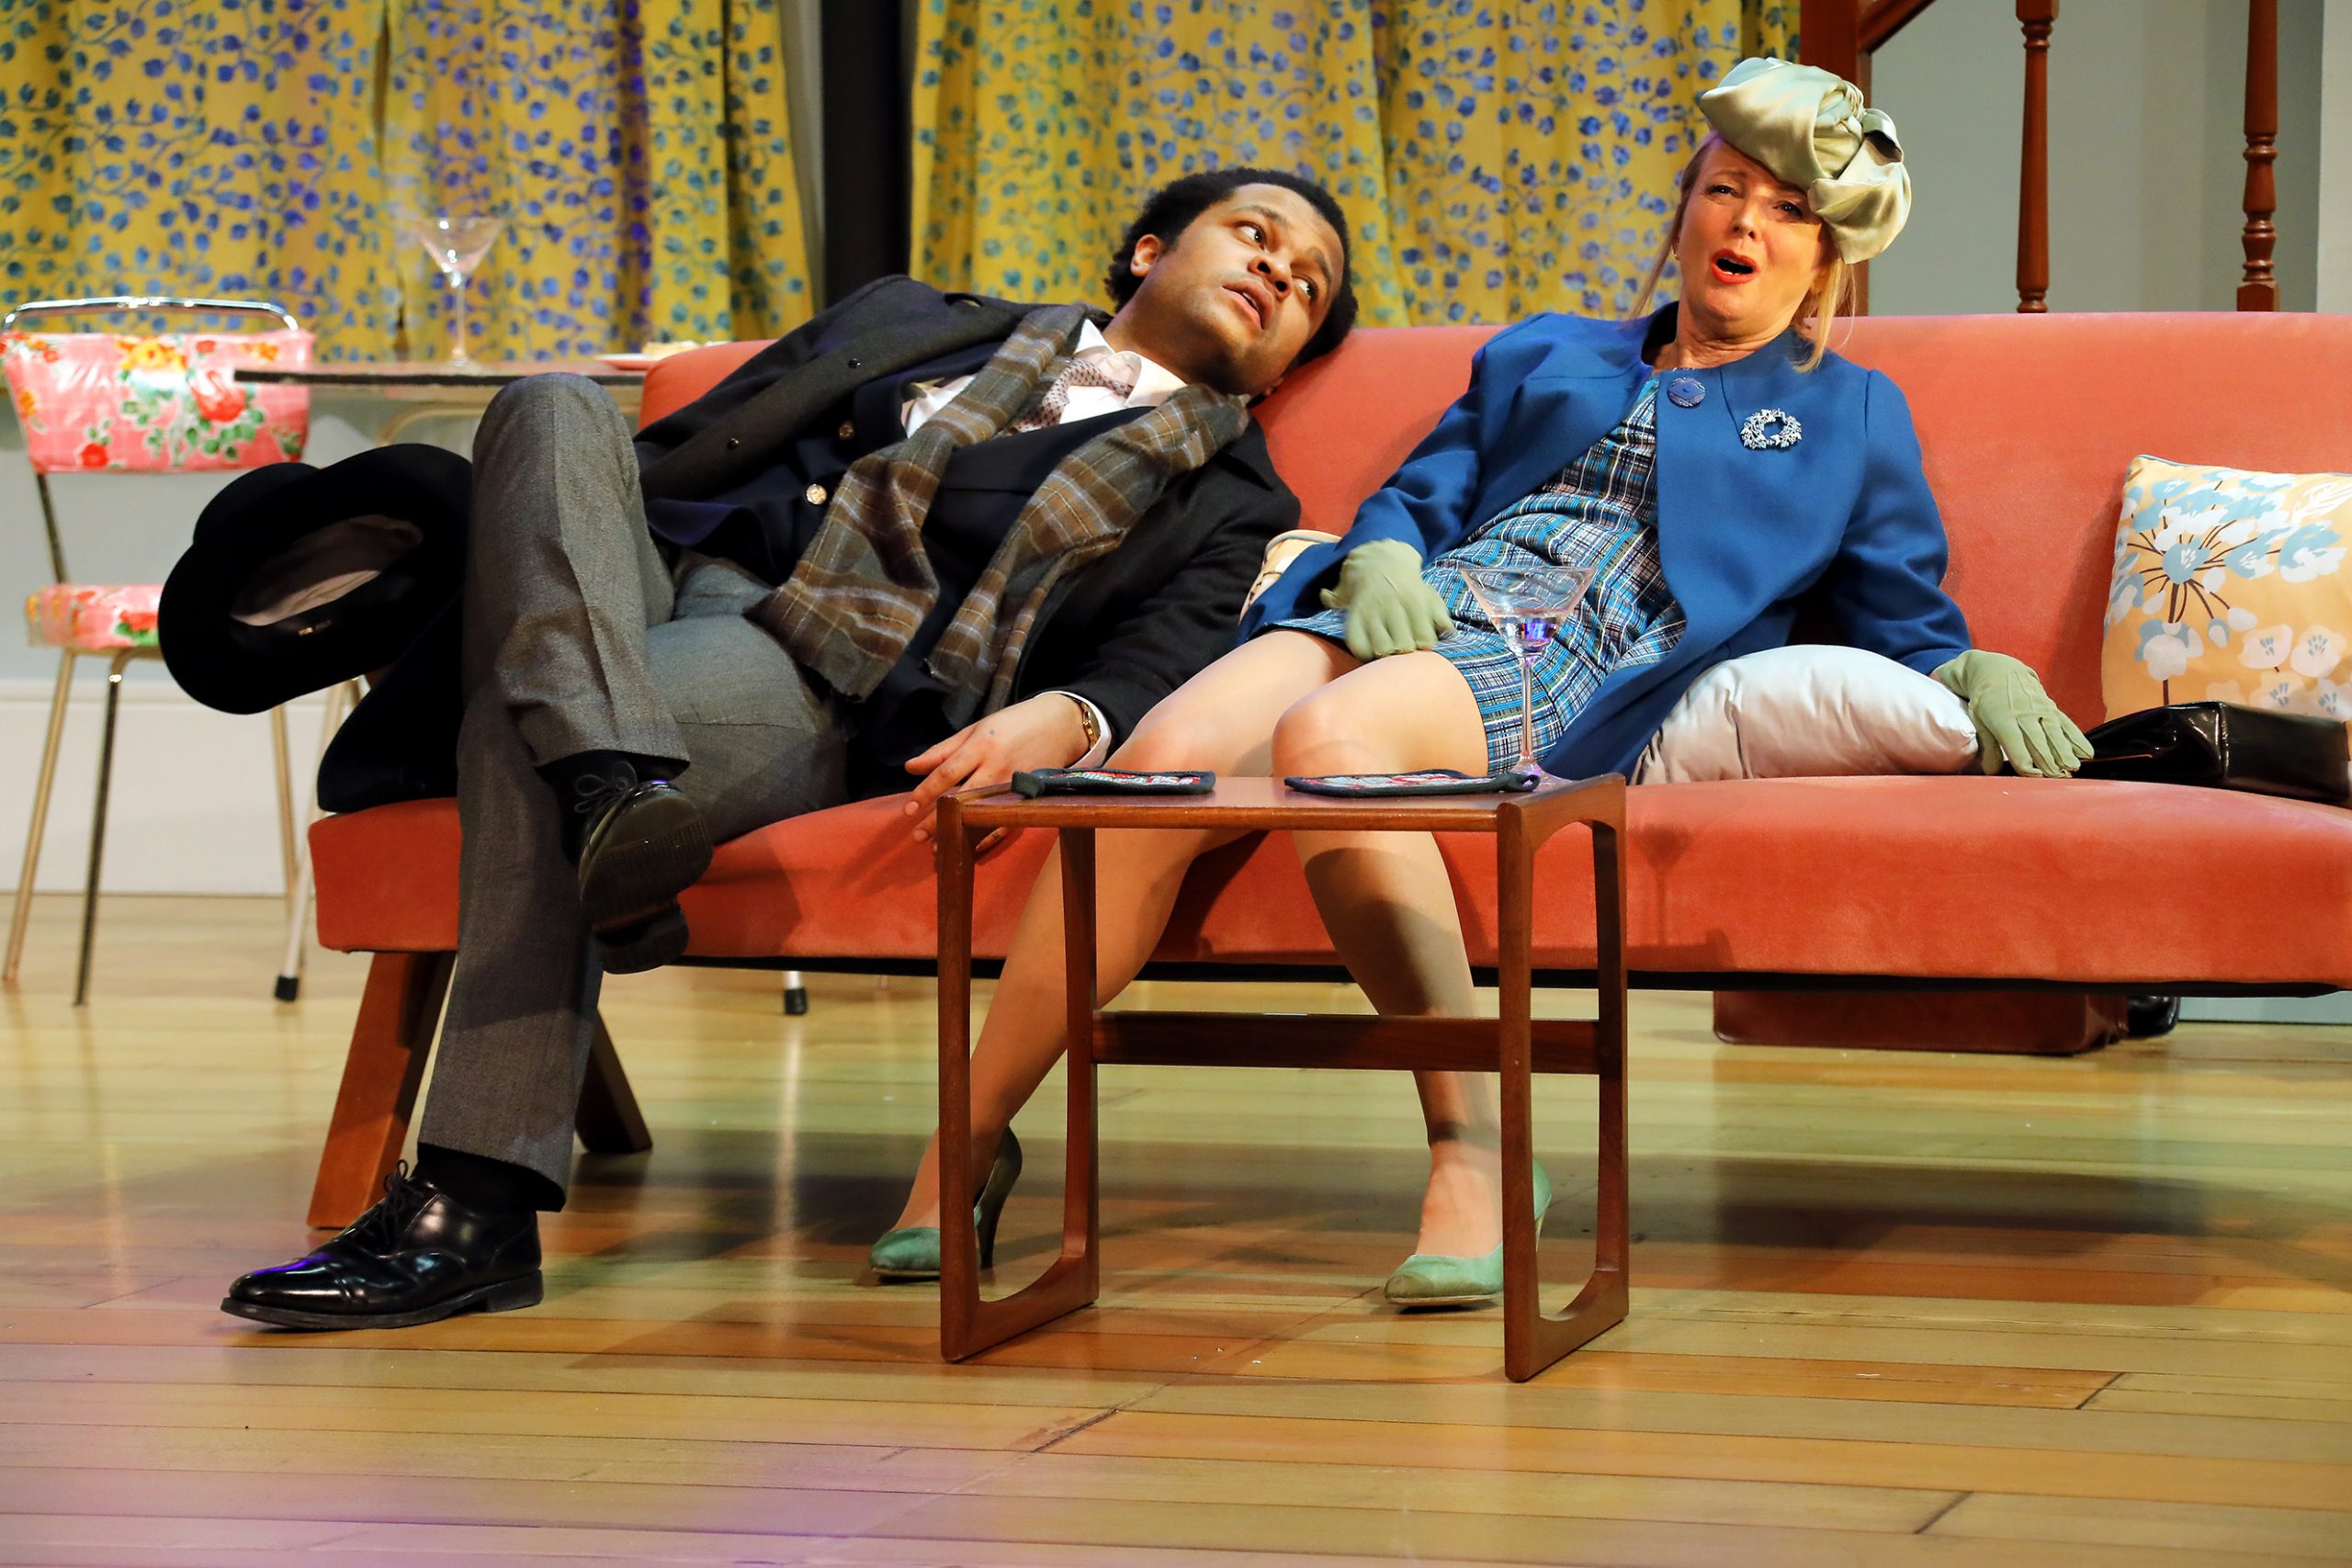 Barefoot in the Park at Pitlochry Festival Theatre